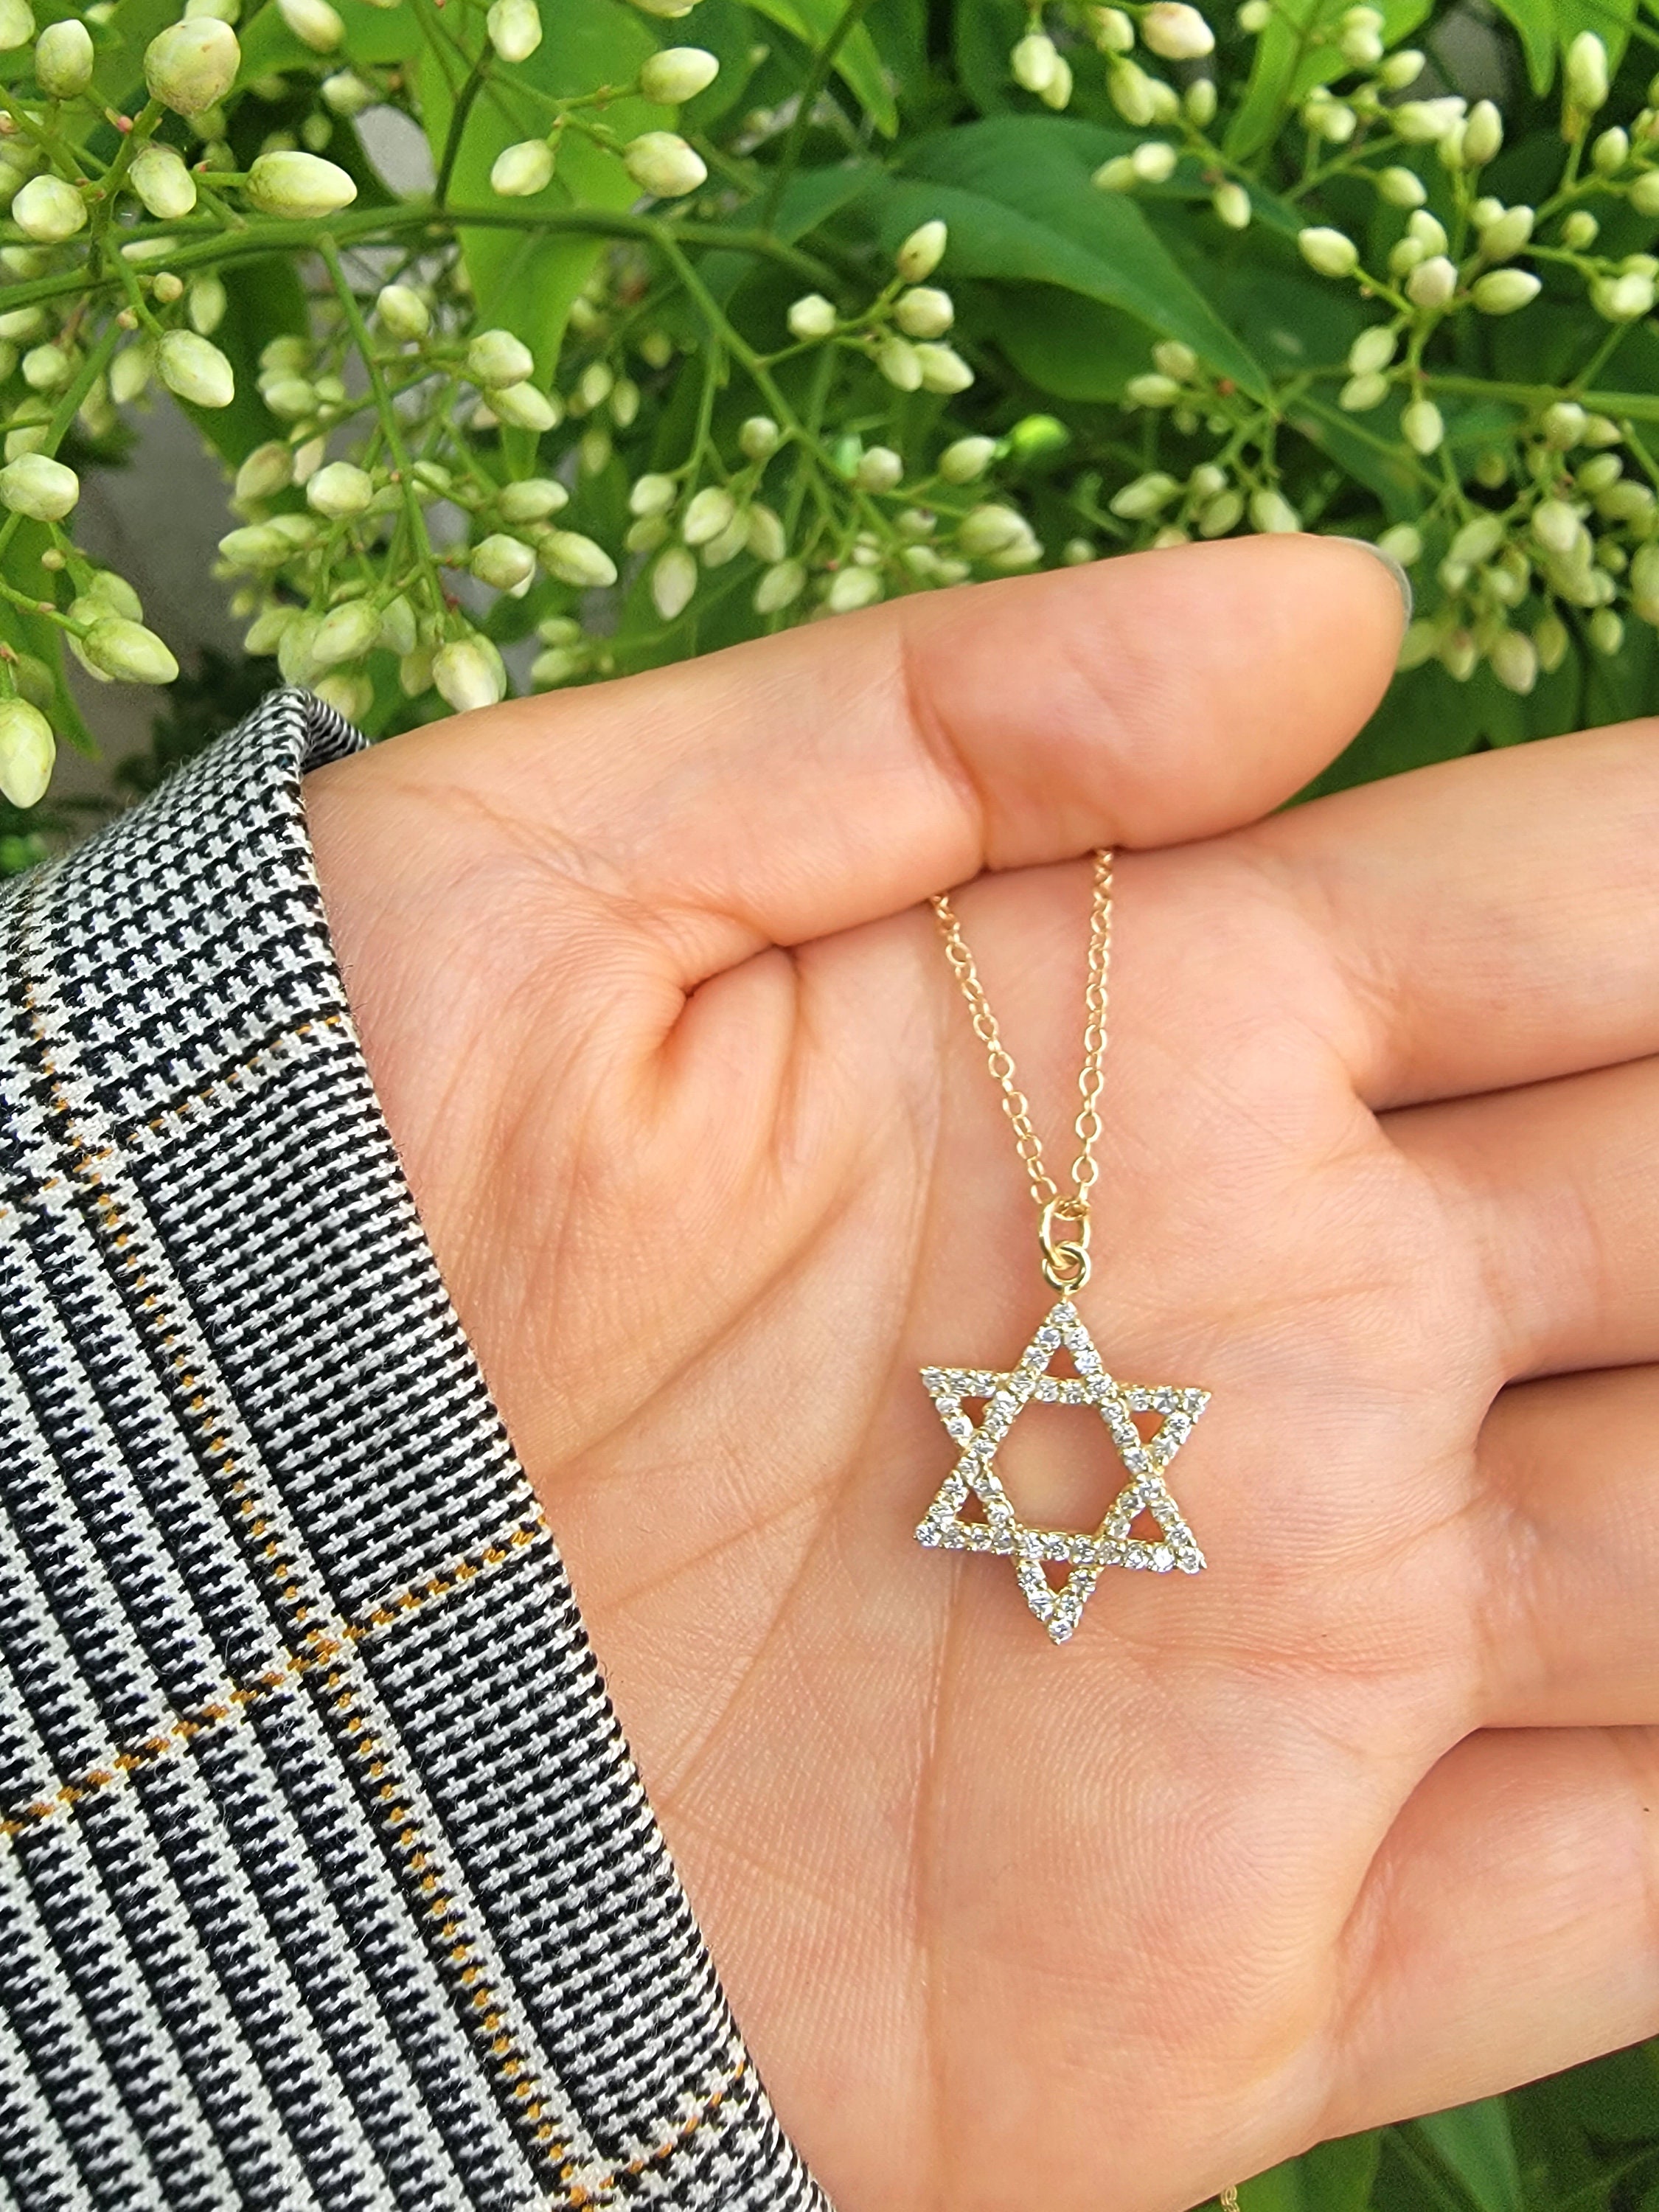 14k Gold Star of David Necklace with Nano Bible - Made in Israel